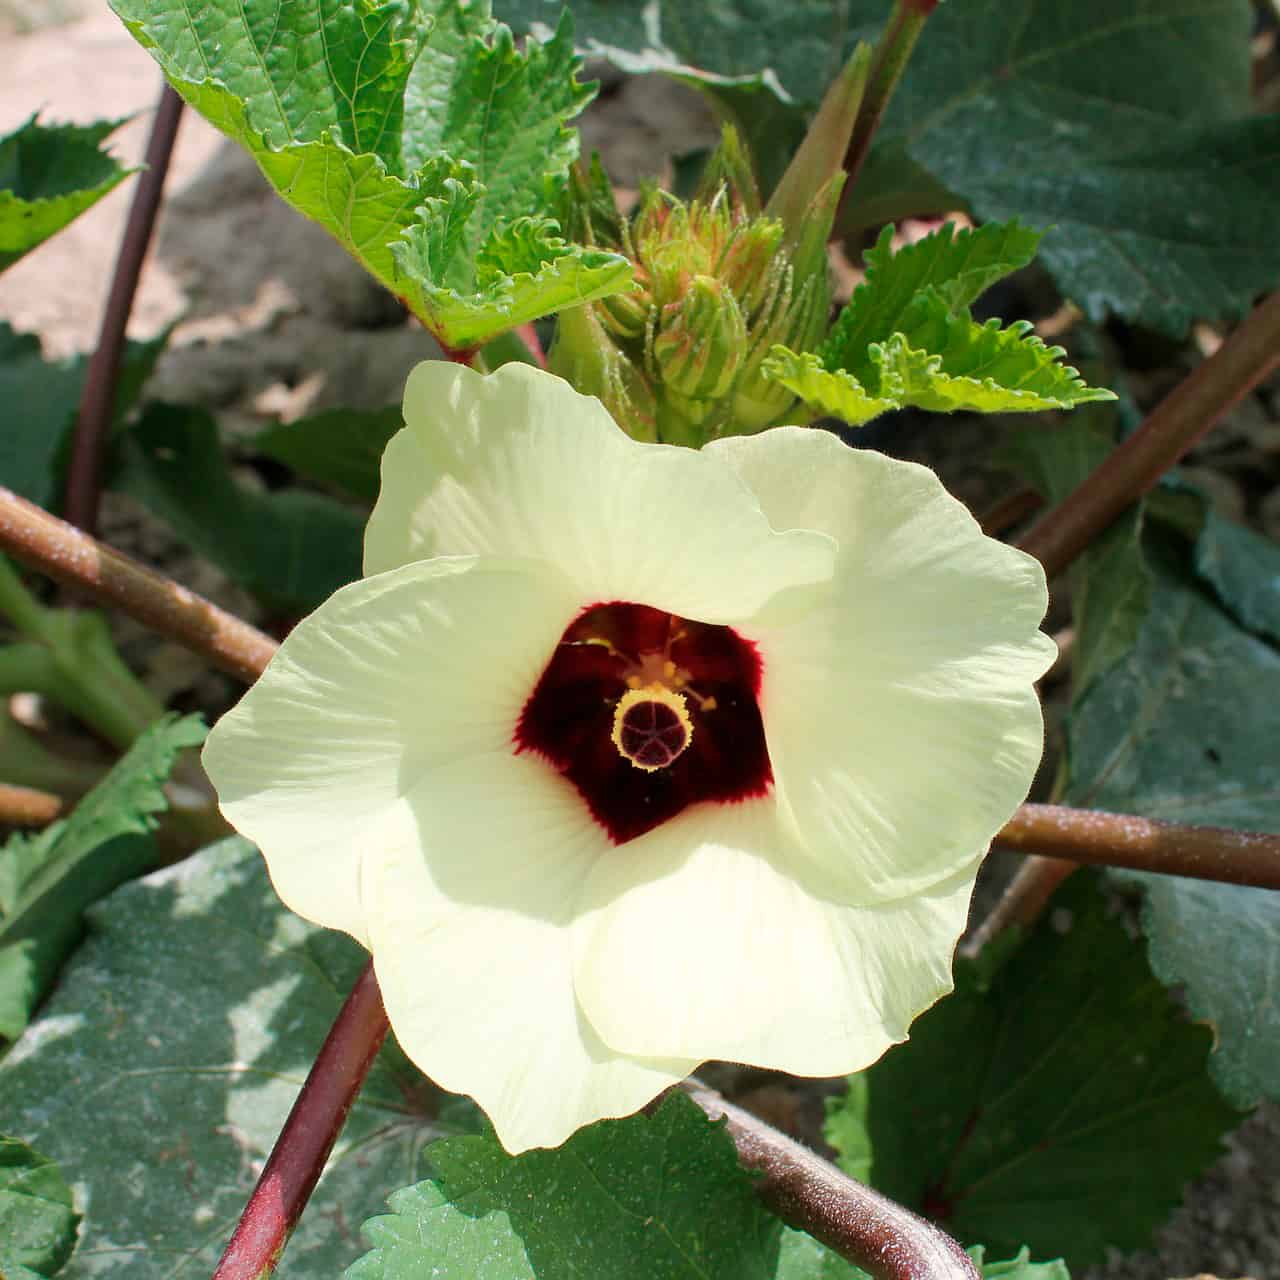 Flowering blossom on an okra plant.